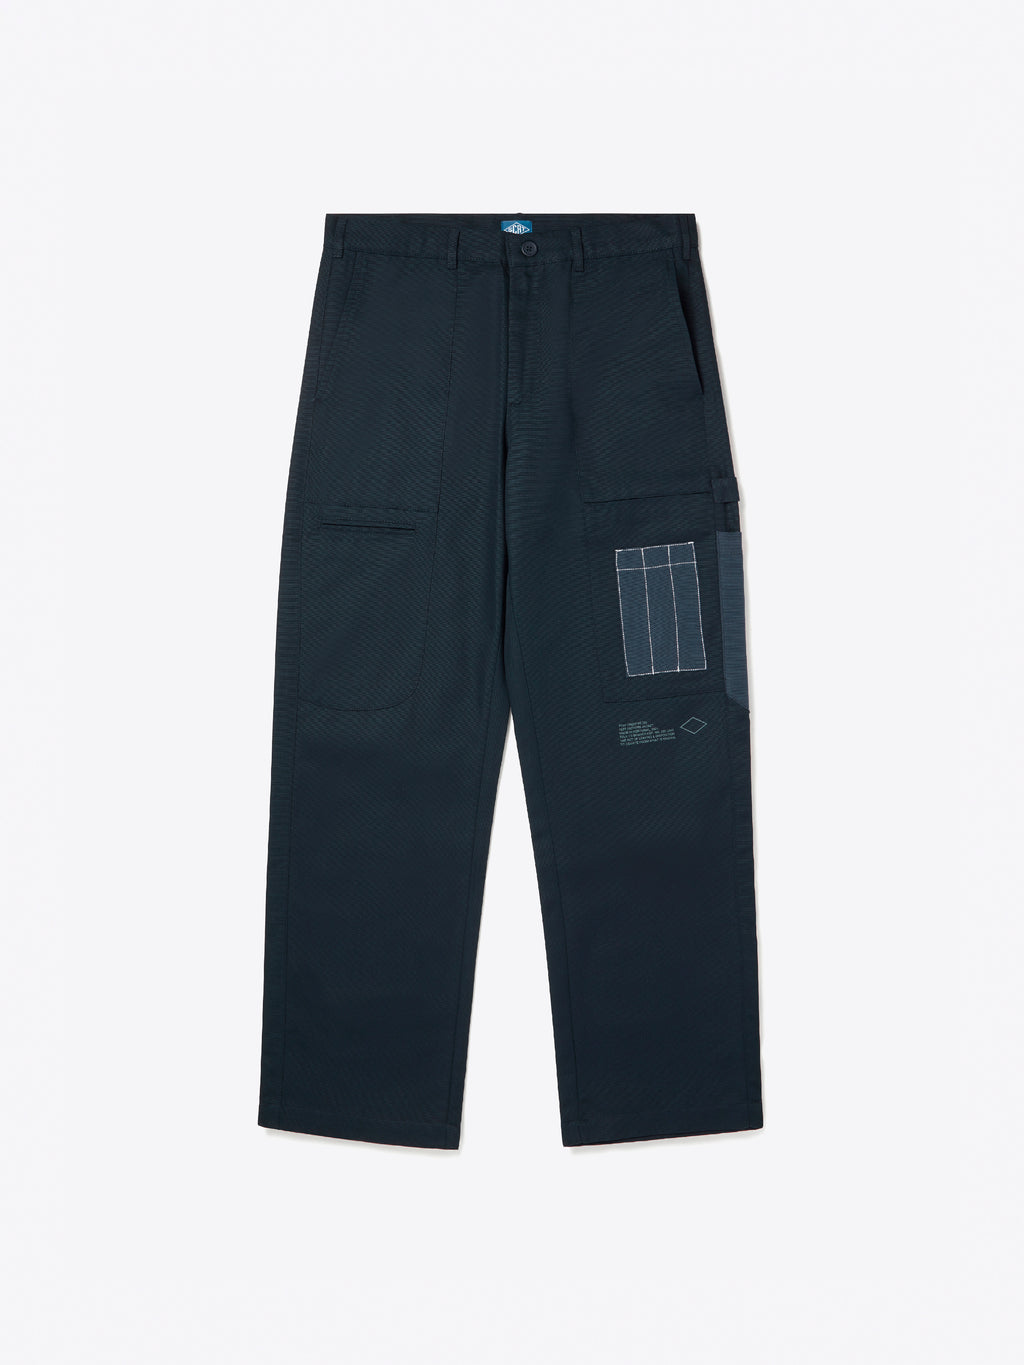 Test Pattern Trousers - Carbon